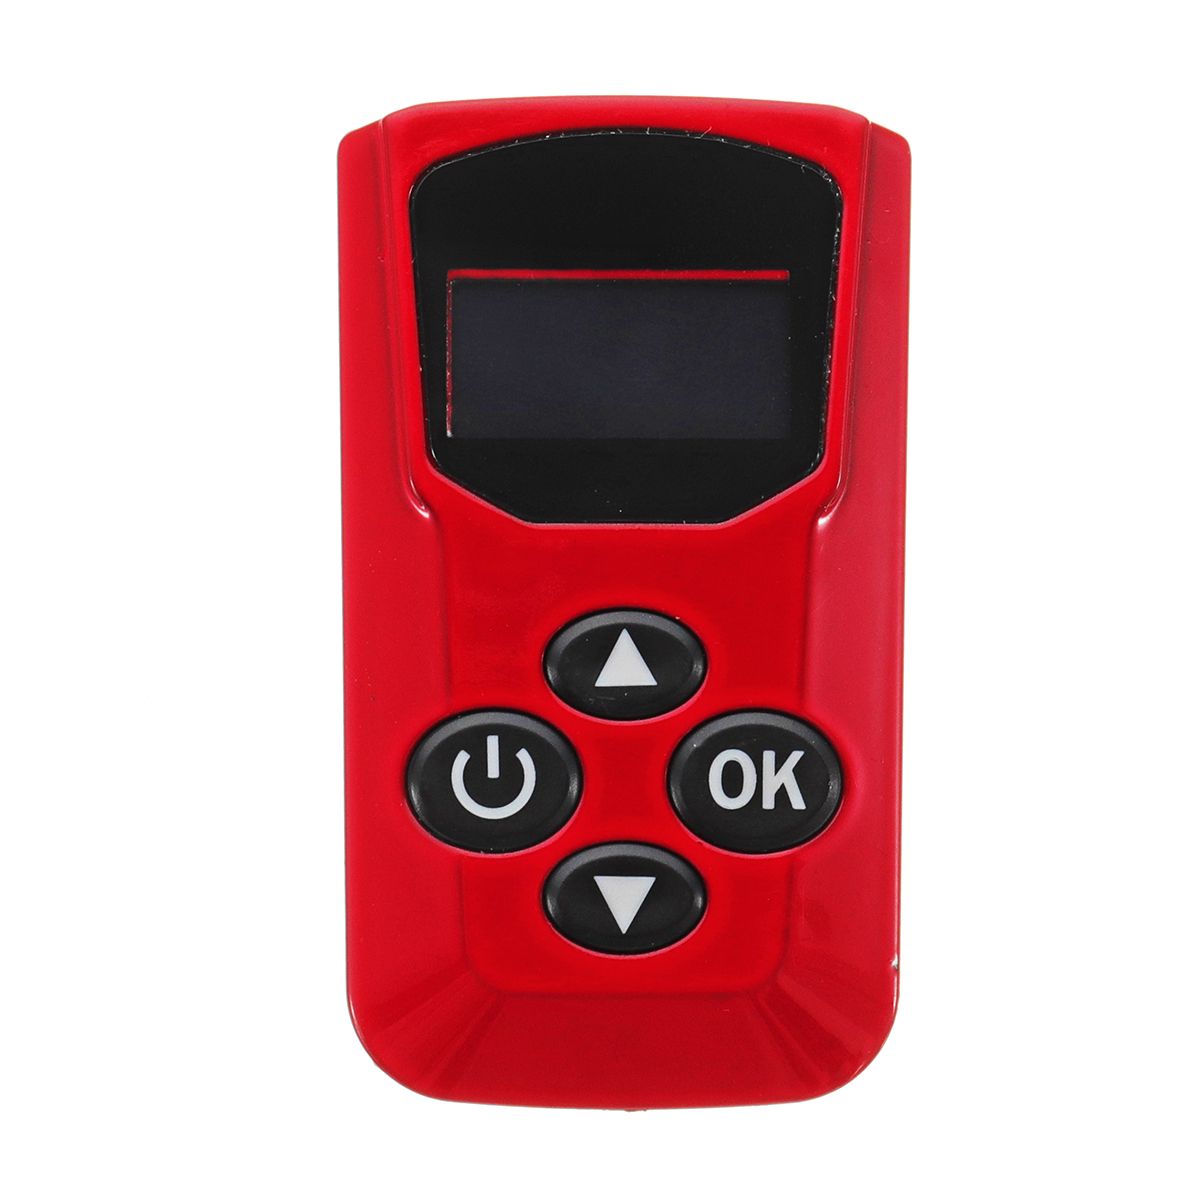 Blue-LCD-Gold-LCD-Remote-Control-For-Available-Parking-Car-Heater-1431297